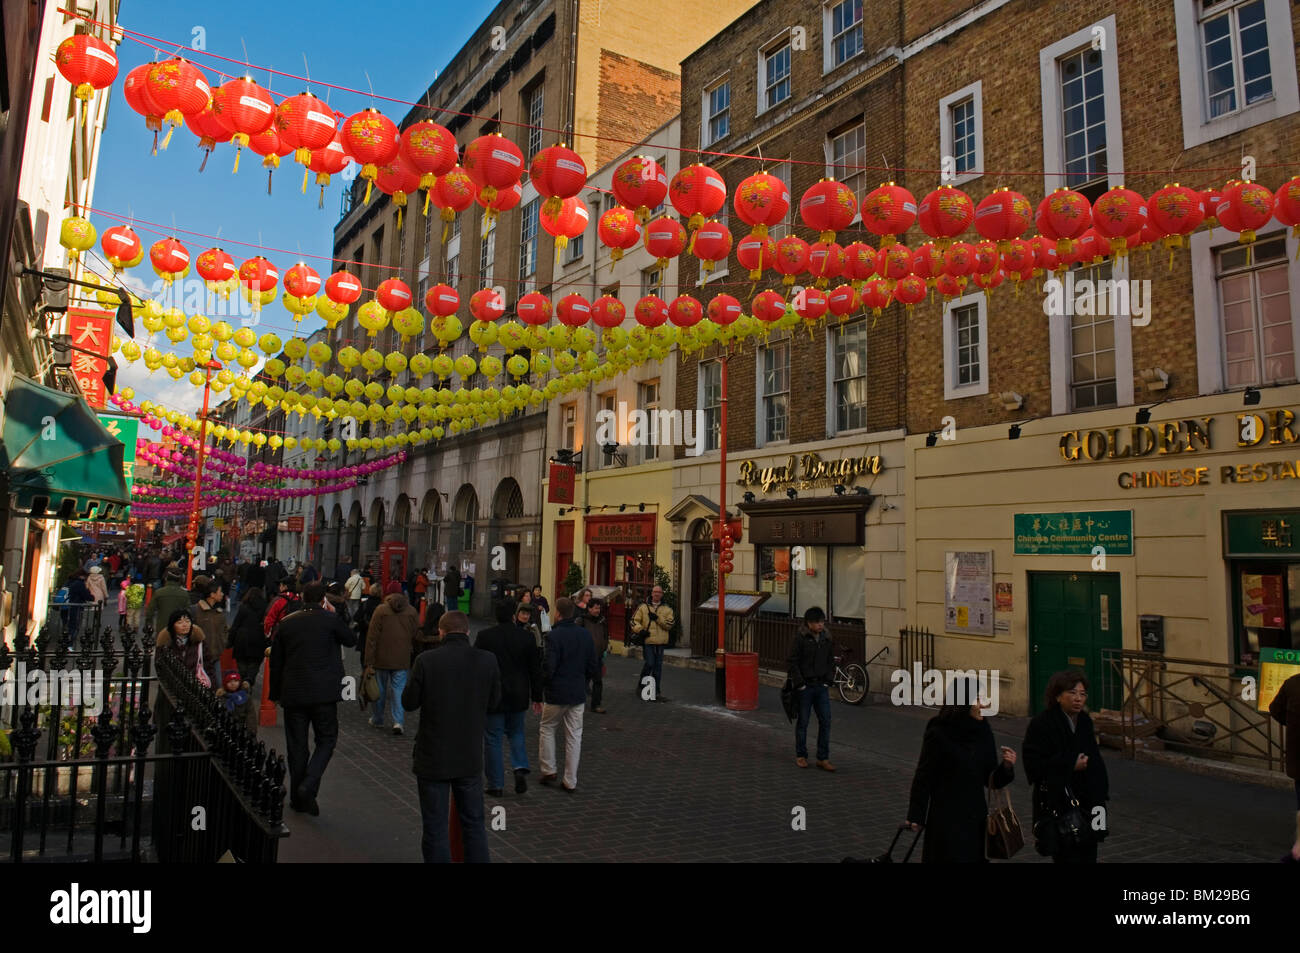 Lantern decorations for Chinese New Year Festival, China Town London England UK 2010 Stock Photo